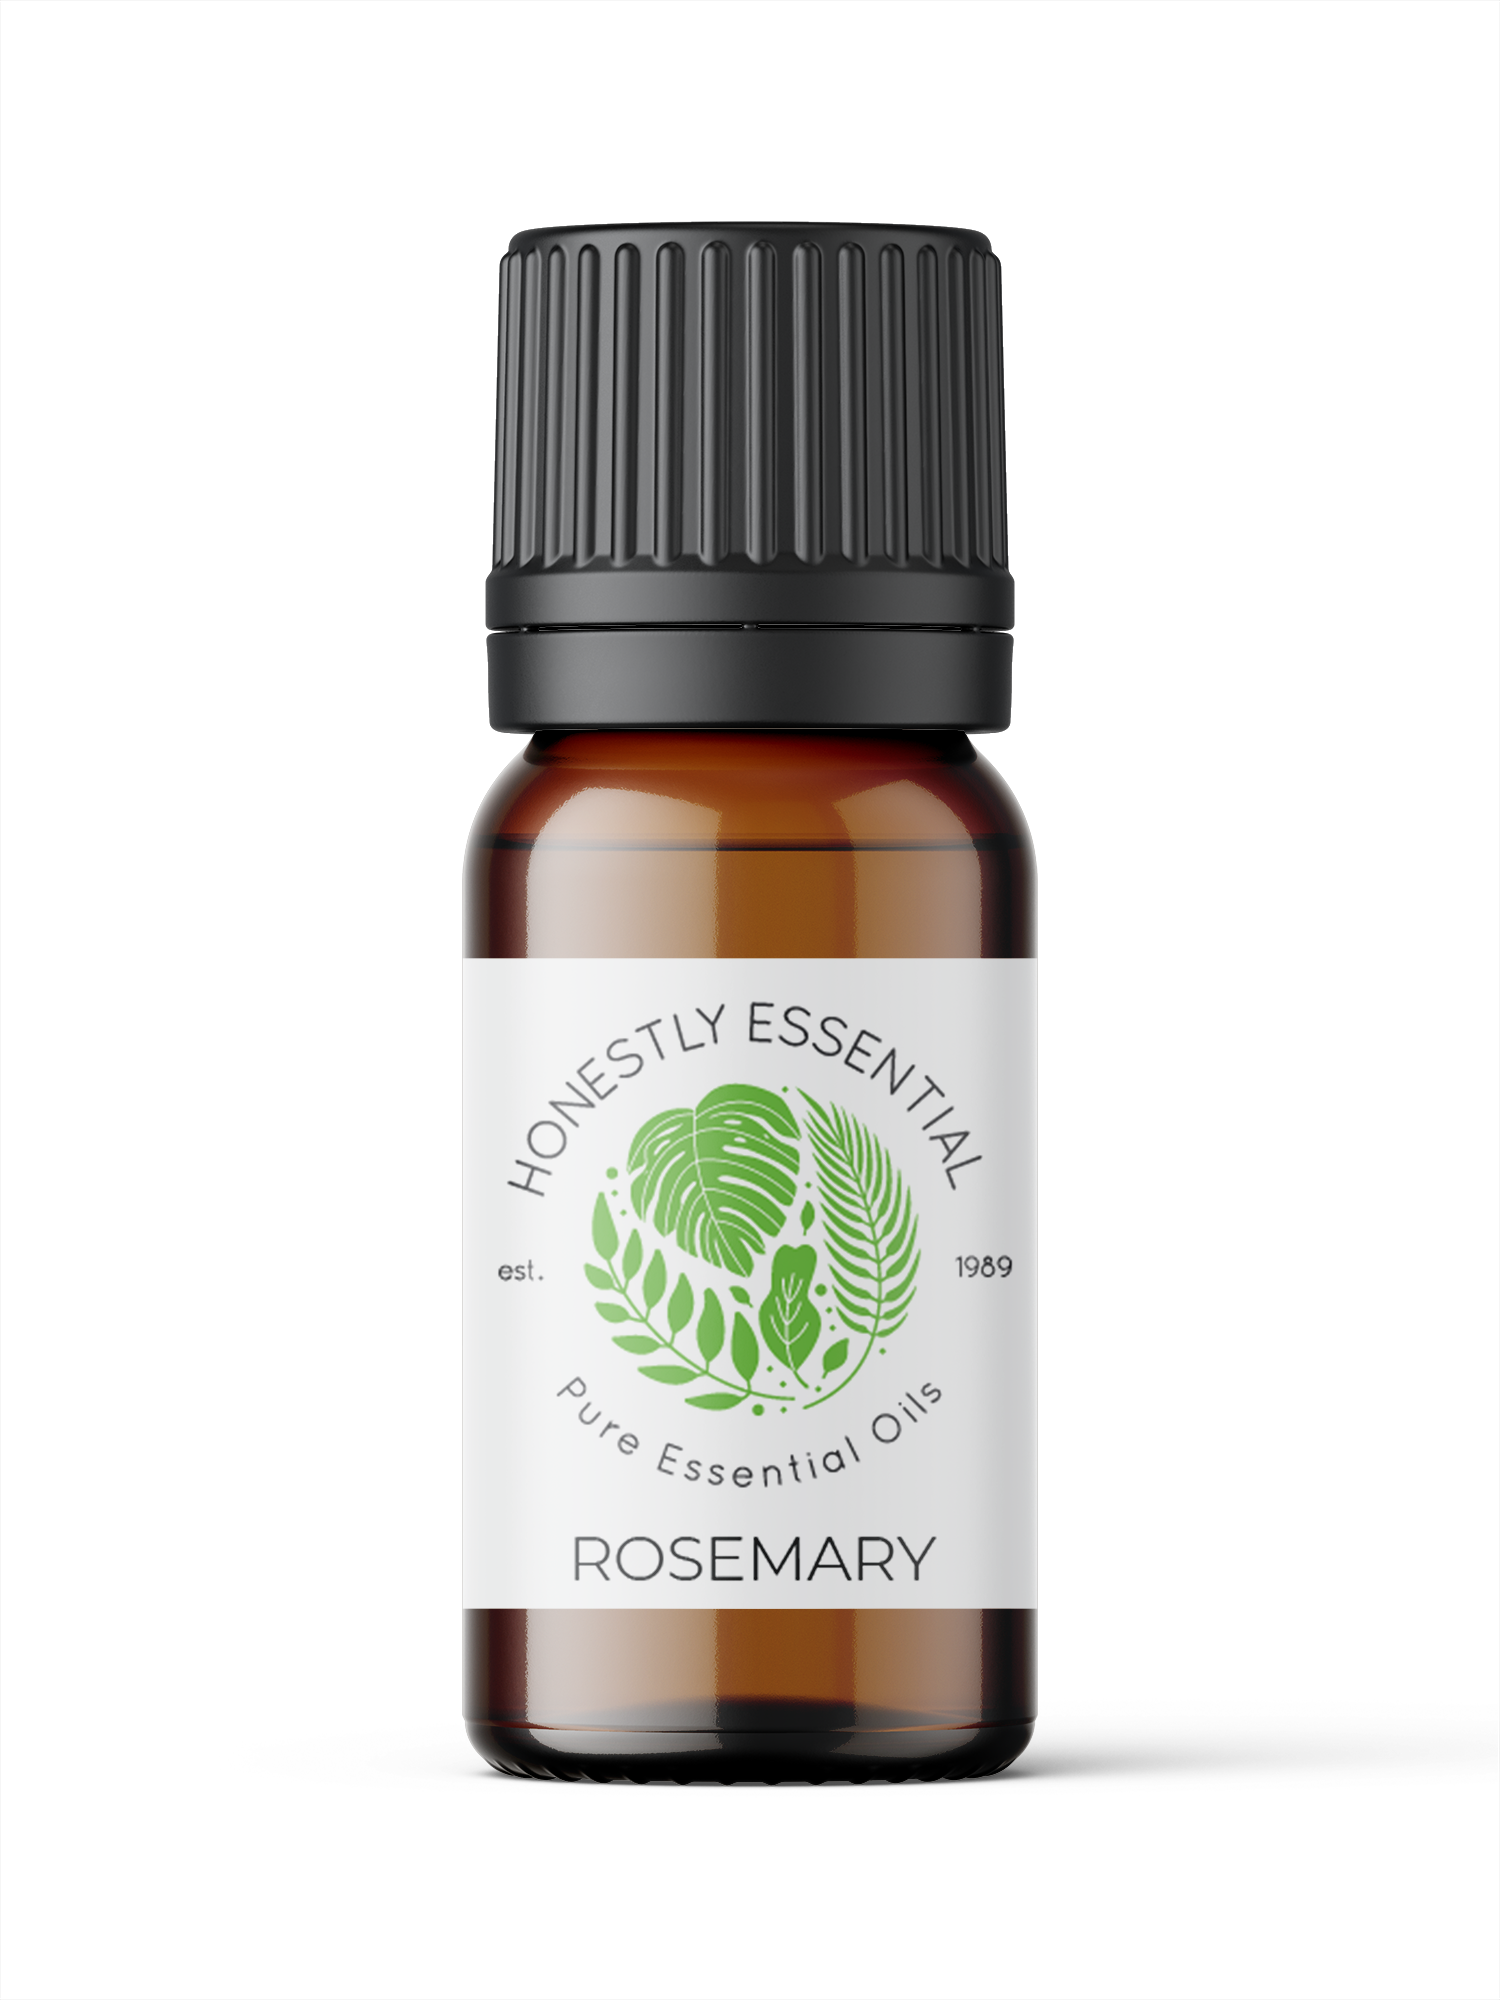 Rosemary Essential Oil - Essential Oils | Honestly Essential Oils energy, essential, herb, herb essential oil, herbs, Immunity, insect and pest repellent, oil, organic, rosemary